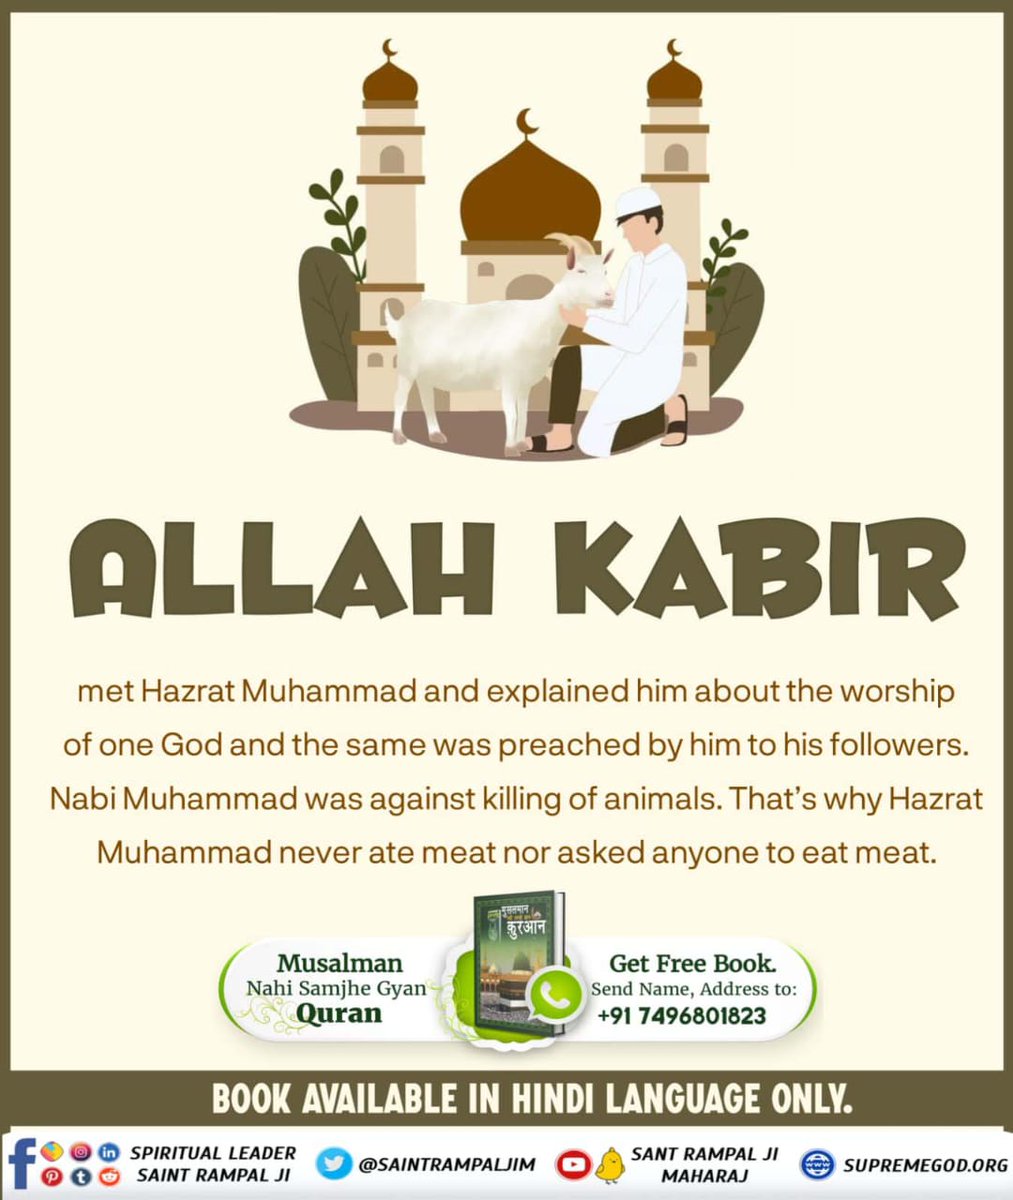 #ProphetMuhammad_NeverAteMeat

ALLAH KABIR
met Hazrat Muhammad and explained him about the worship of one God and the same was preached by him to his followers. Nabi Muhammad was against killing of animals. That's why Hazrat Muhammad never ate meat nor asked any